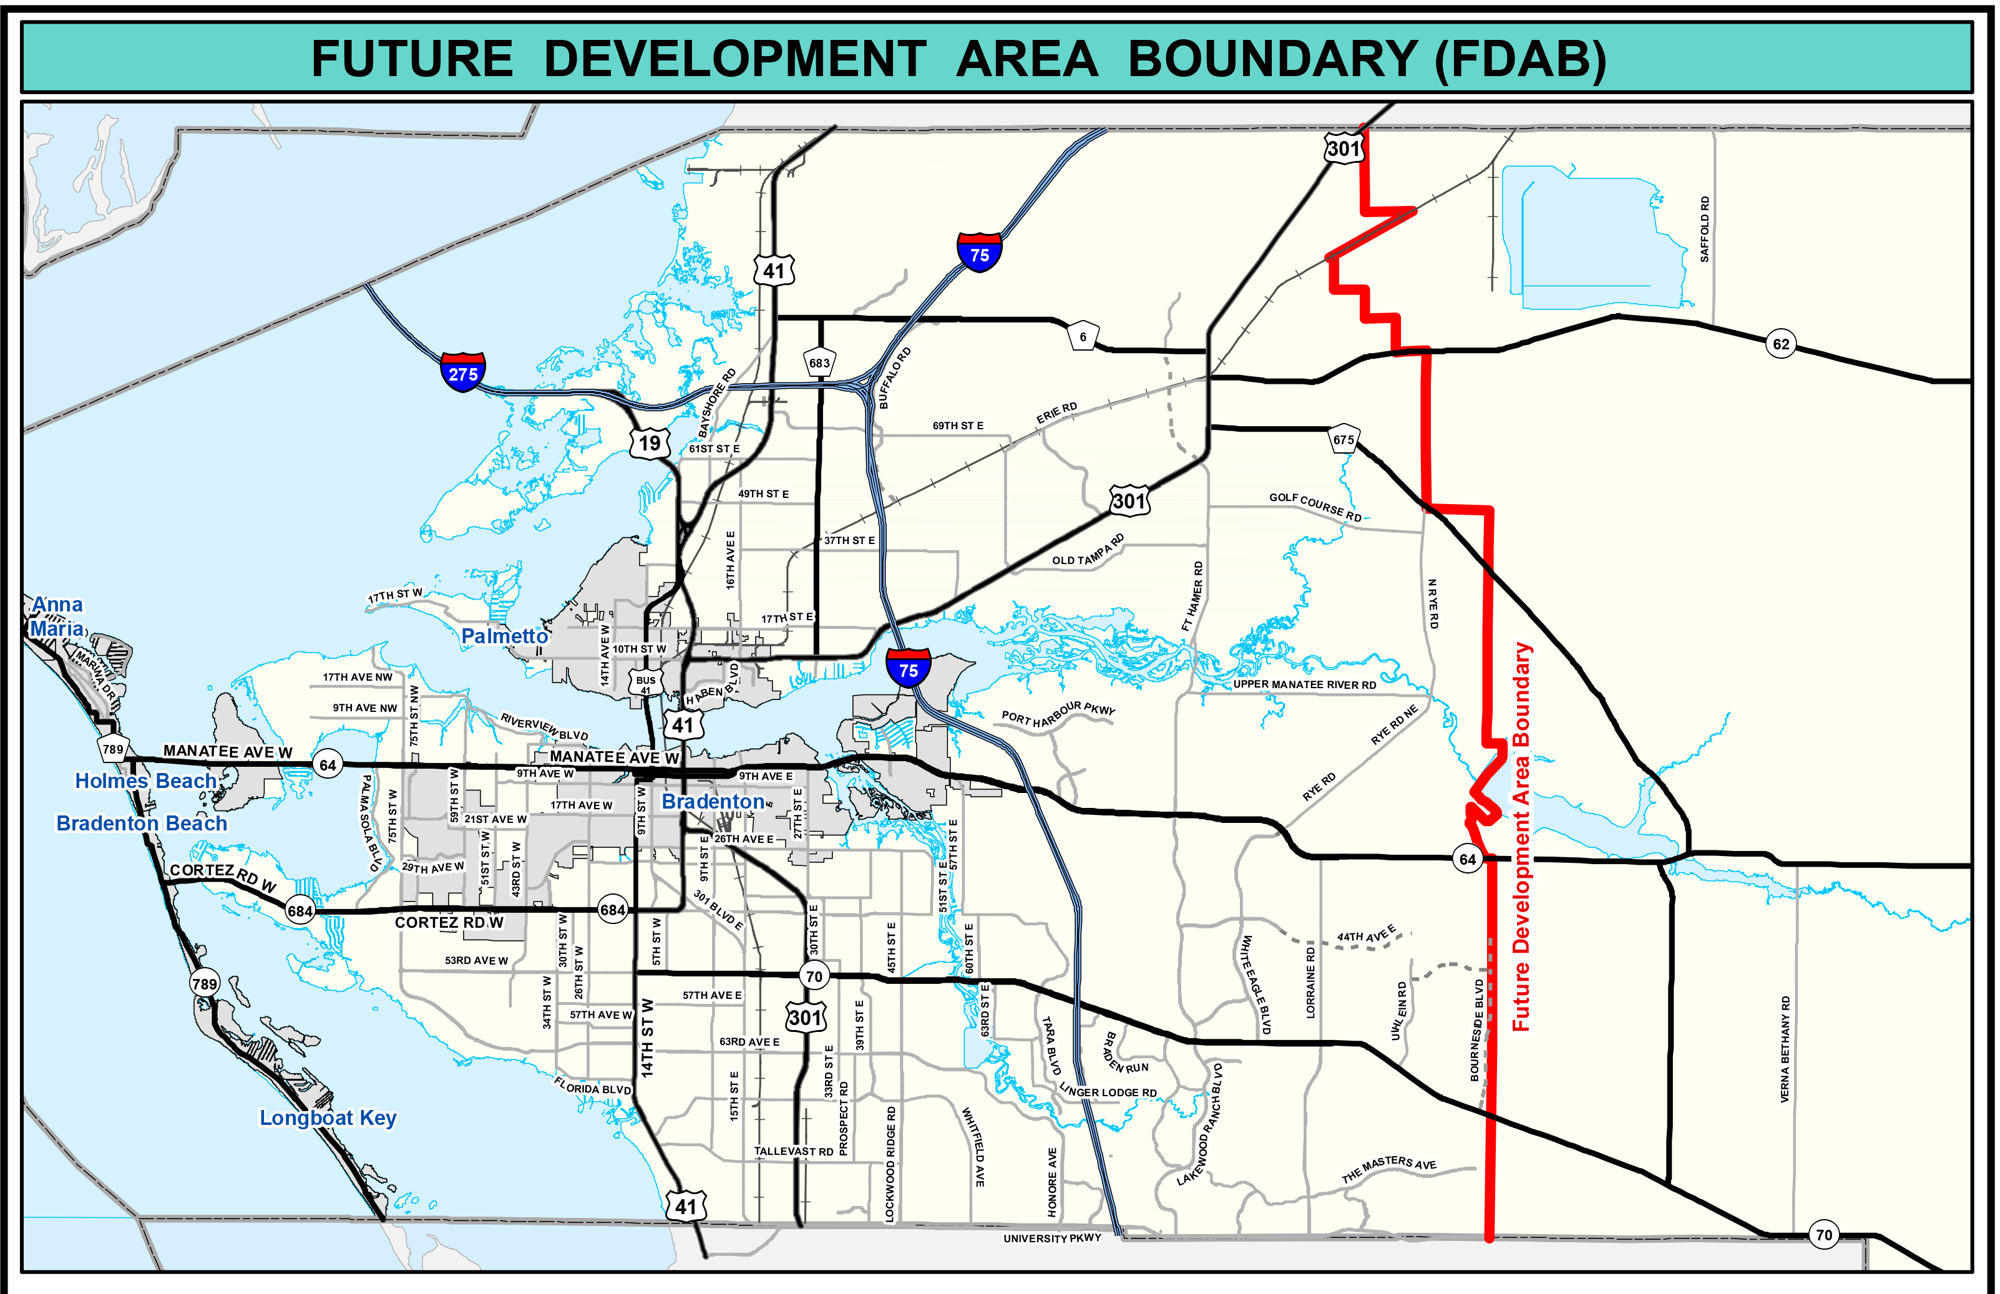 A map of the Future Development Area Boundary line (red)in Manatee County. The line was last moved in 2006 and currently runs along Bournside Boulevard in Eastern Manatee County.